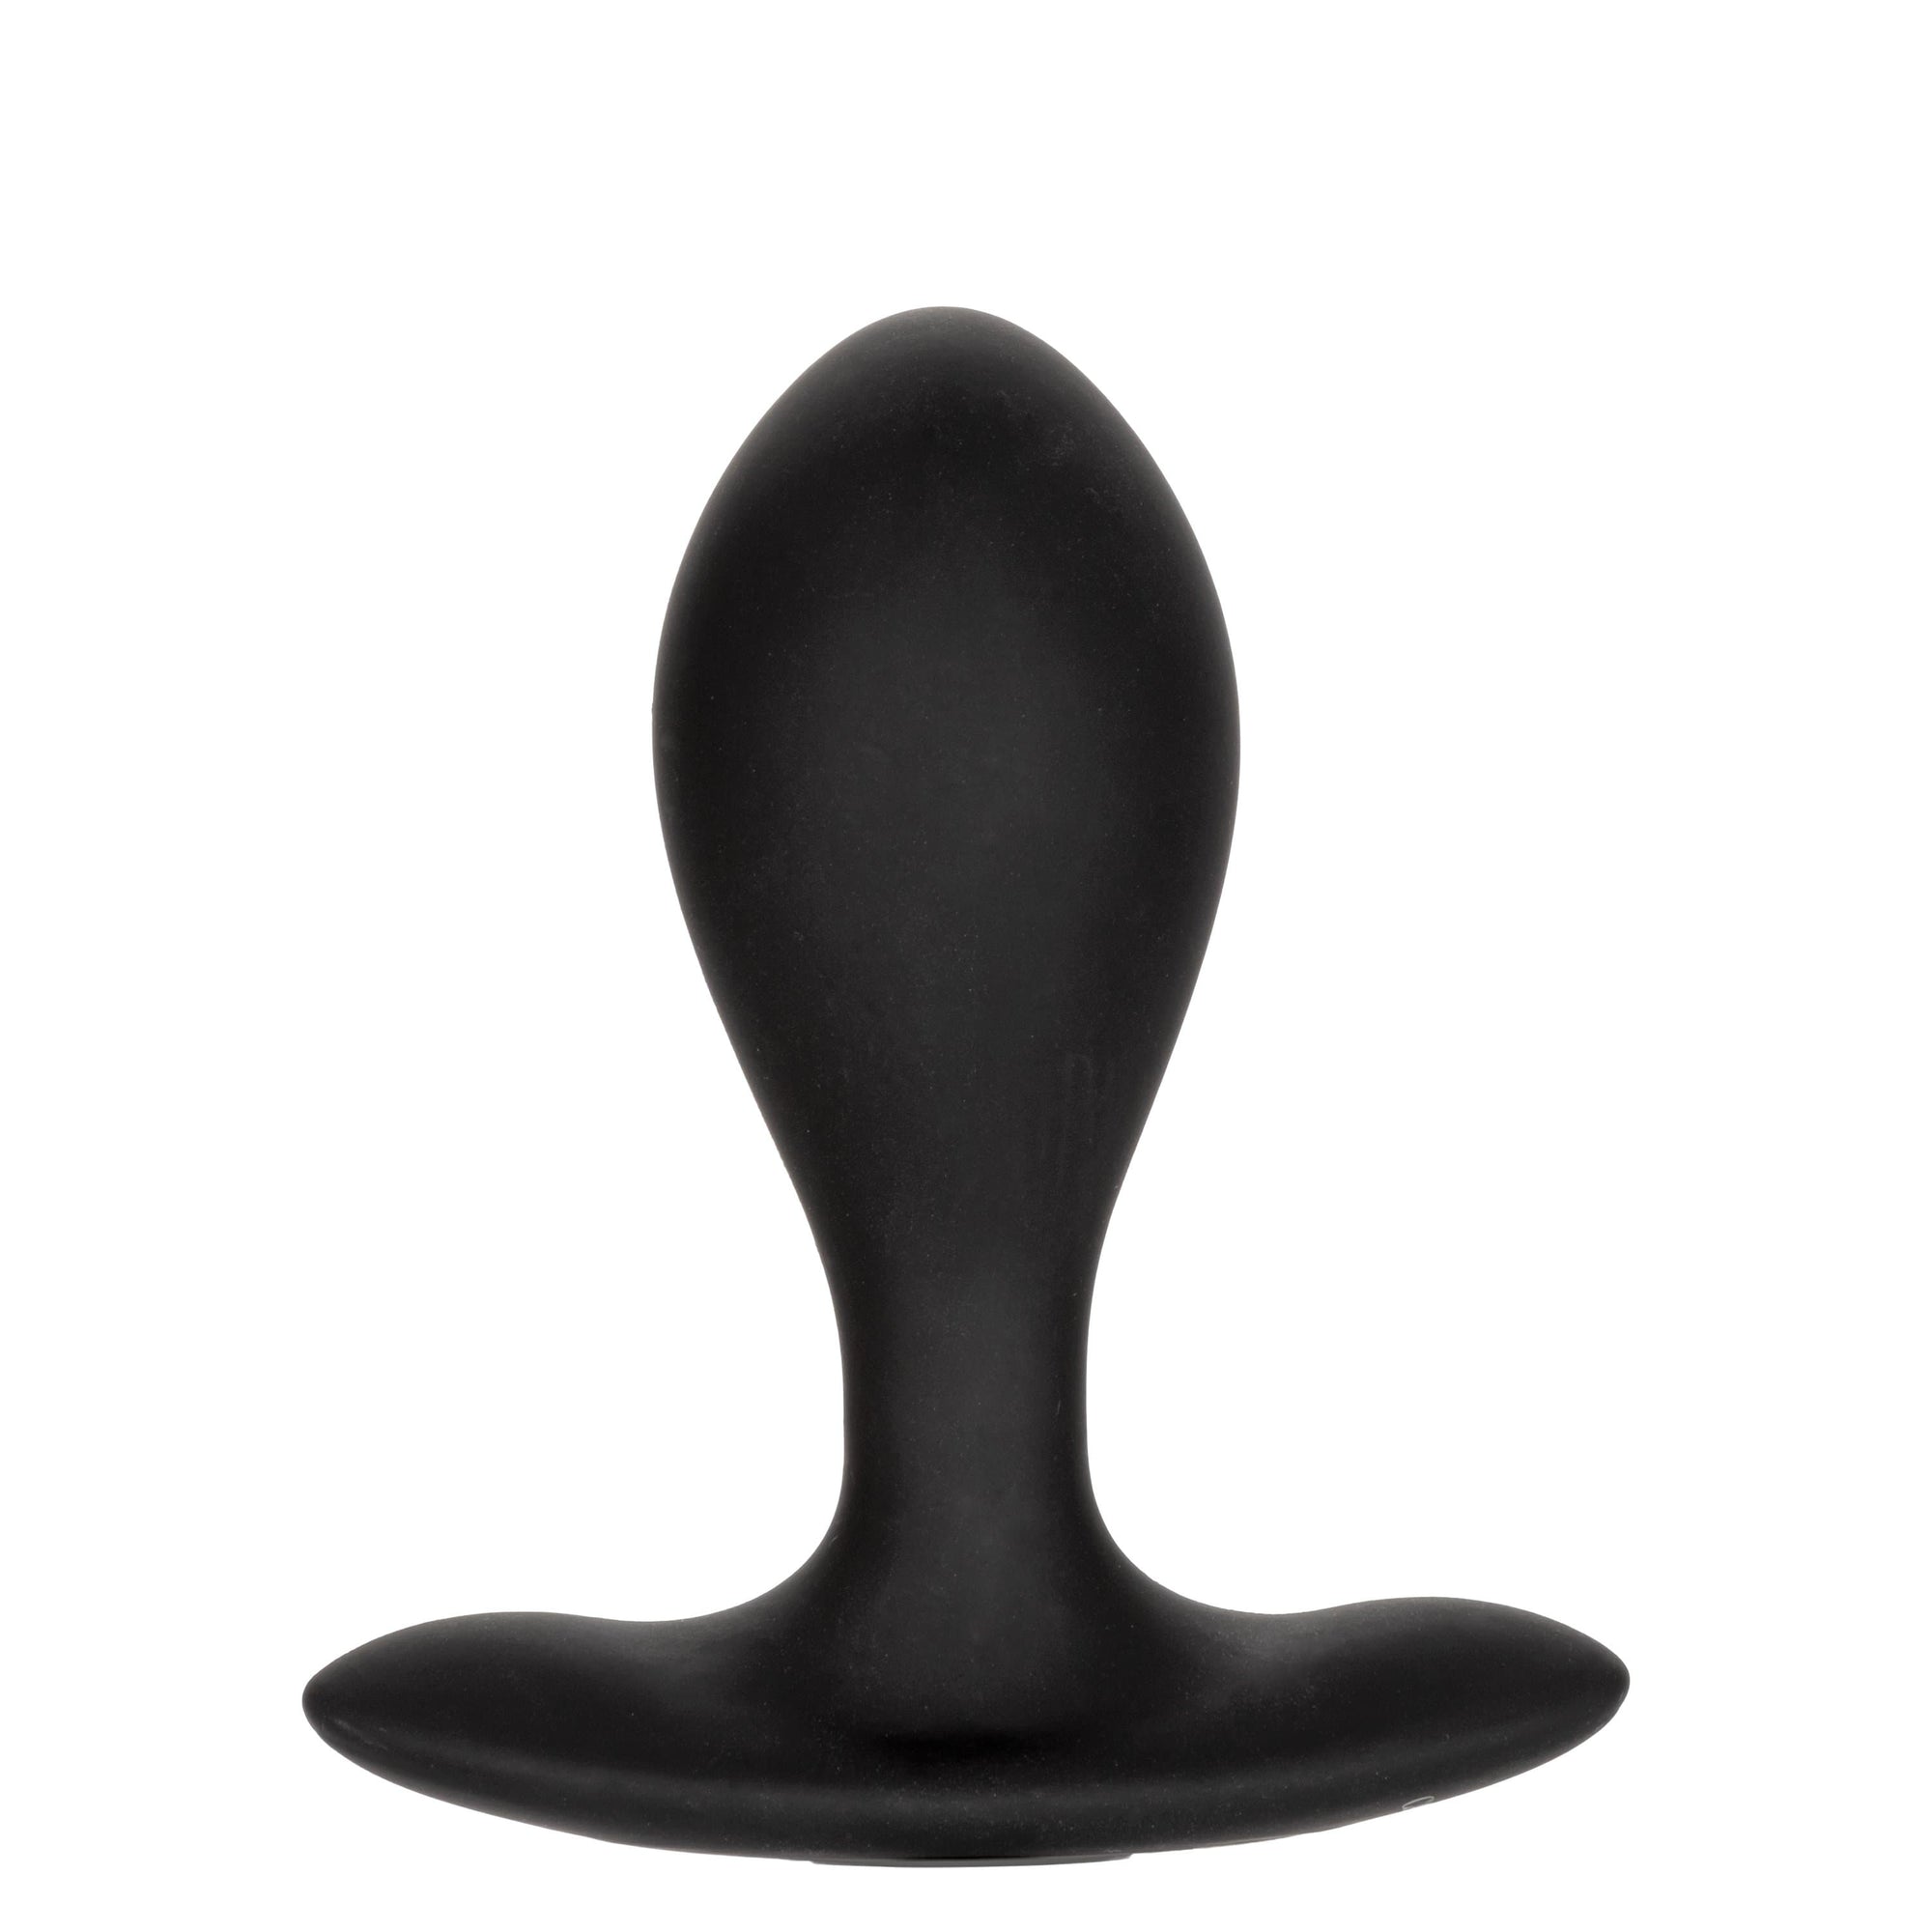 California Exotics - Colt Weighted Inflatable Pumper Plug (Black) Expandable Anal Plug (Non Vibration) 716770098948 CherryAffairs